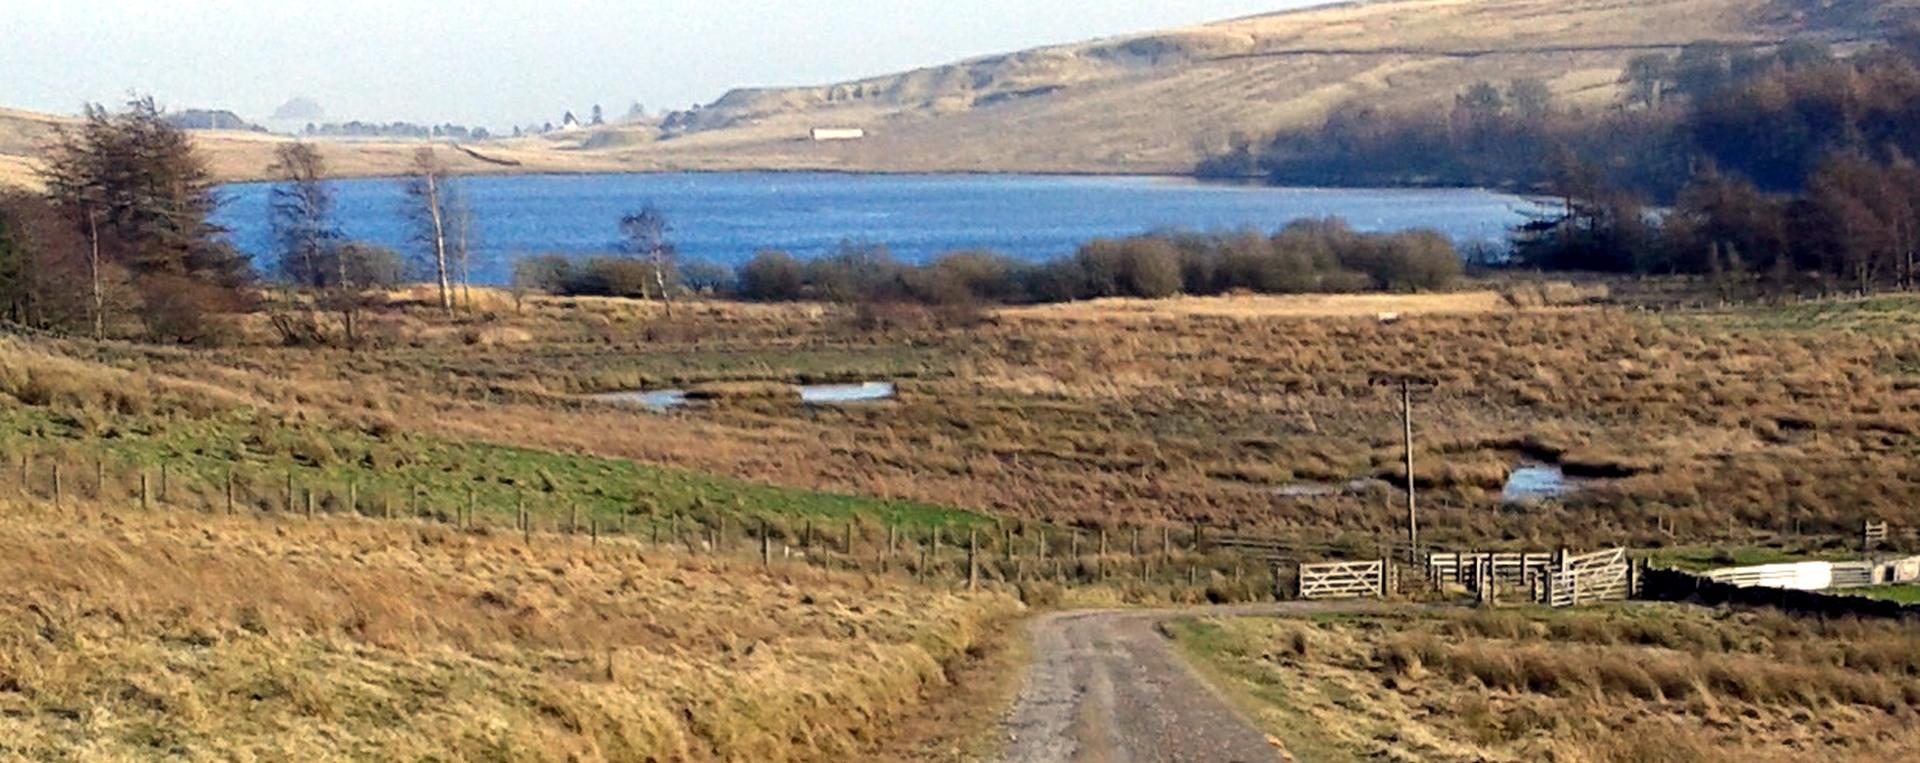 Tindale Tarn from the RSPB road ,there is a viewing platform near to the waters edge just off the road